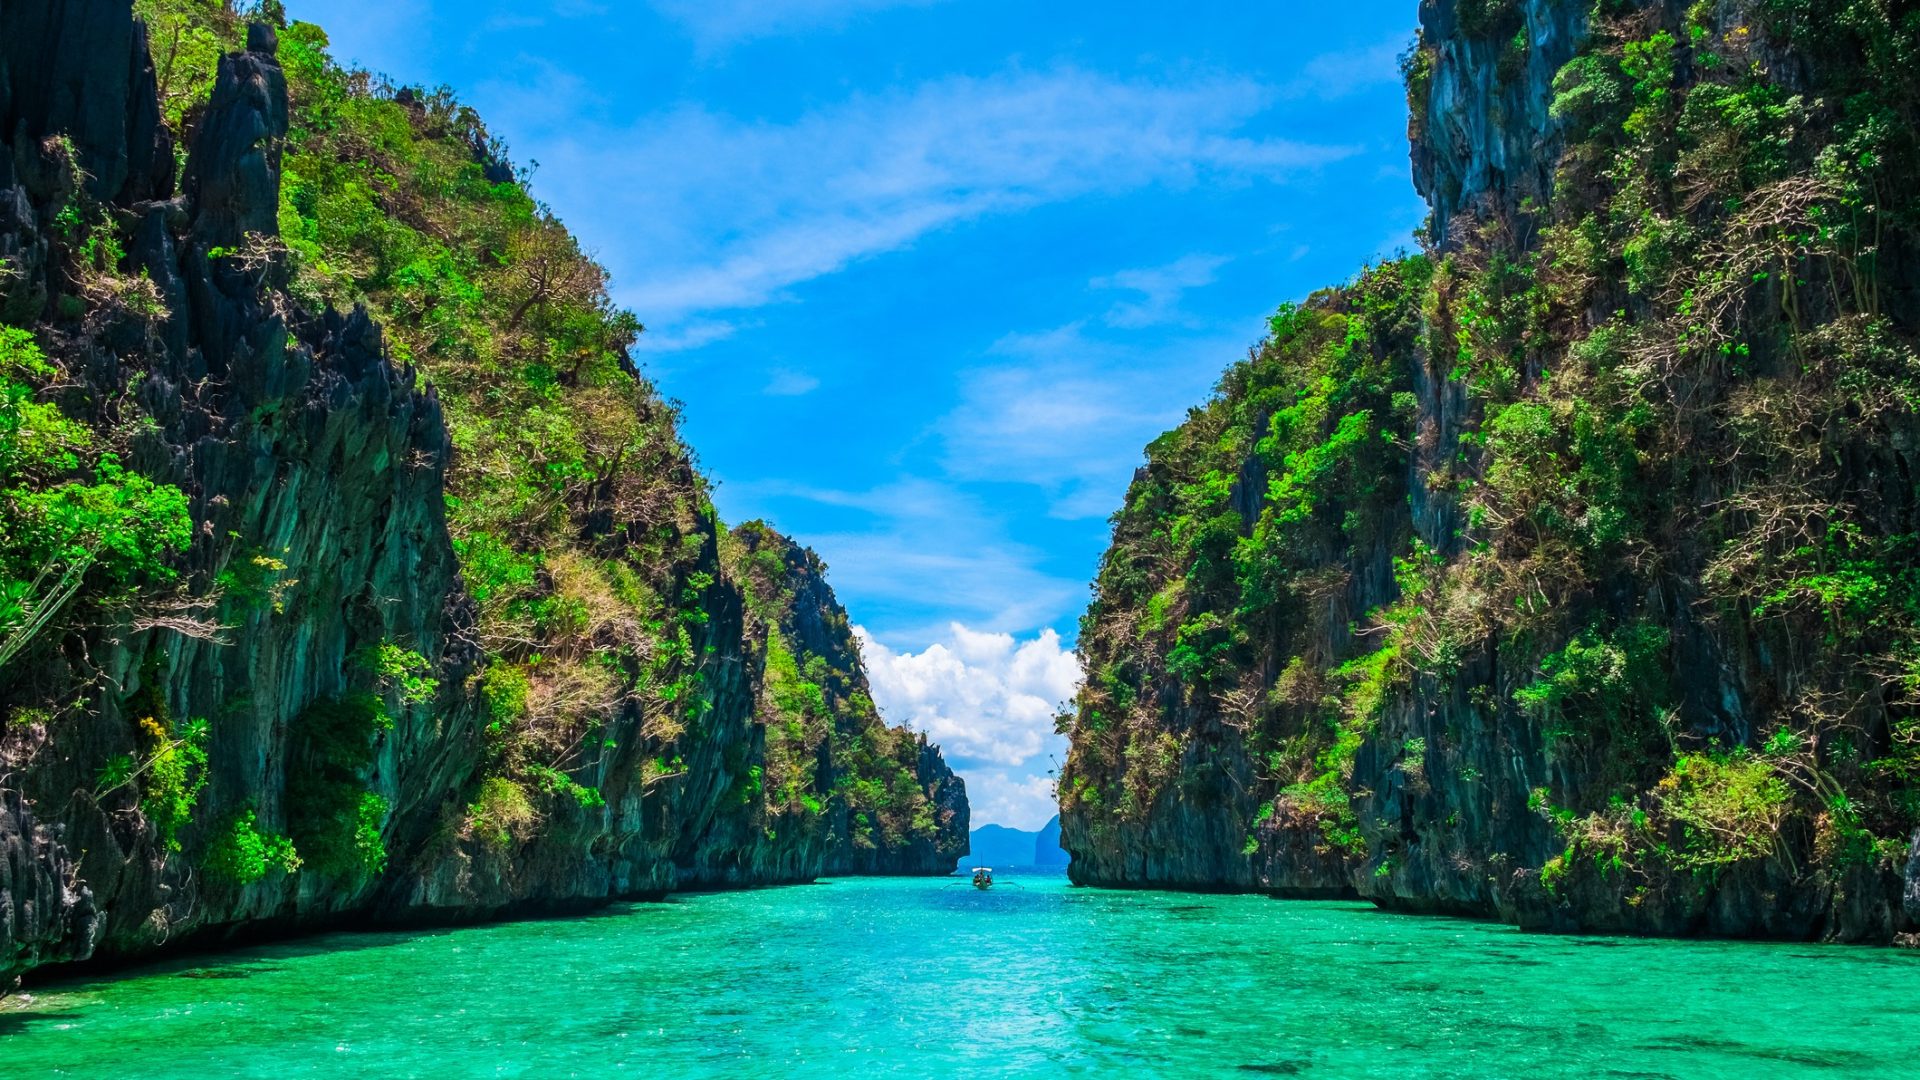 <p>"While Palawan is a little more expensive than other islands in the Philippines, you can still have an amazing holiday on this island for only $50 per day," said Lena Mrowka, the travel blogger behind <a href="https://notanotherbackpacker.com/en/" rel="noreferrer noopener">Not Another Backpacker</a>.</p> <p>"This cost includes activities such as island hopping tours and transport to the most beautiful beaches on the island."</p> <p><strong><em>Take Our Poll: <a href="https://www.gobankingrates.com/saving-money/home/take-our-poll-are-you-struggling-to-keep-up-with-your-utility-bills/?utm_campaign=1189272&utm_source=msn.com&utm_content=5&utm_medium=rss">Are You Struggling To Keep Up With Your Utility Bills?</a></em></strong></p>